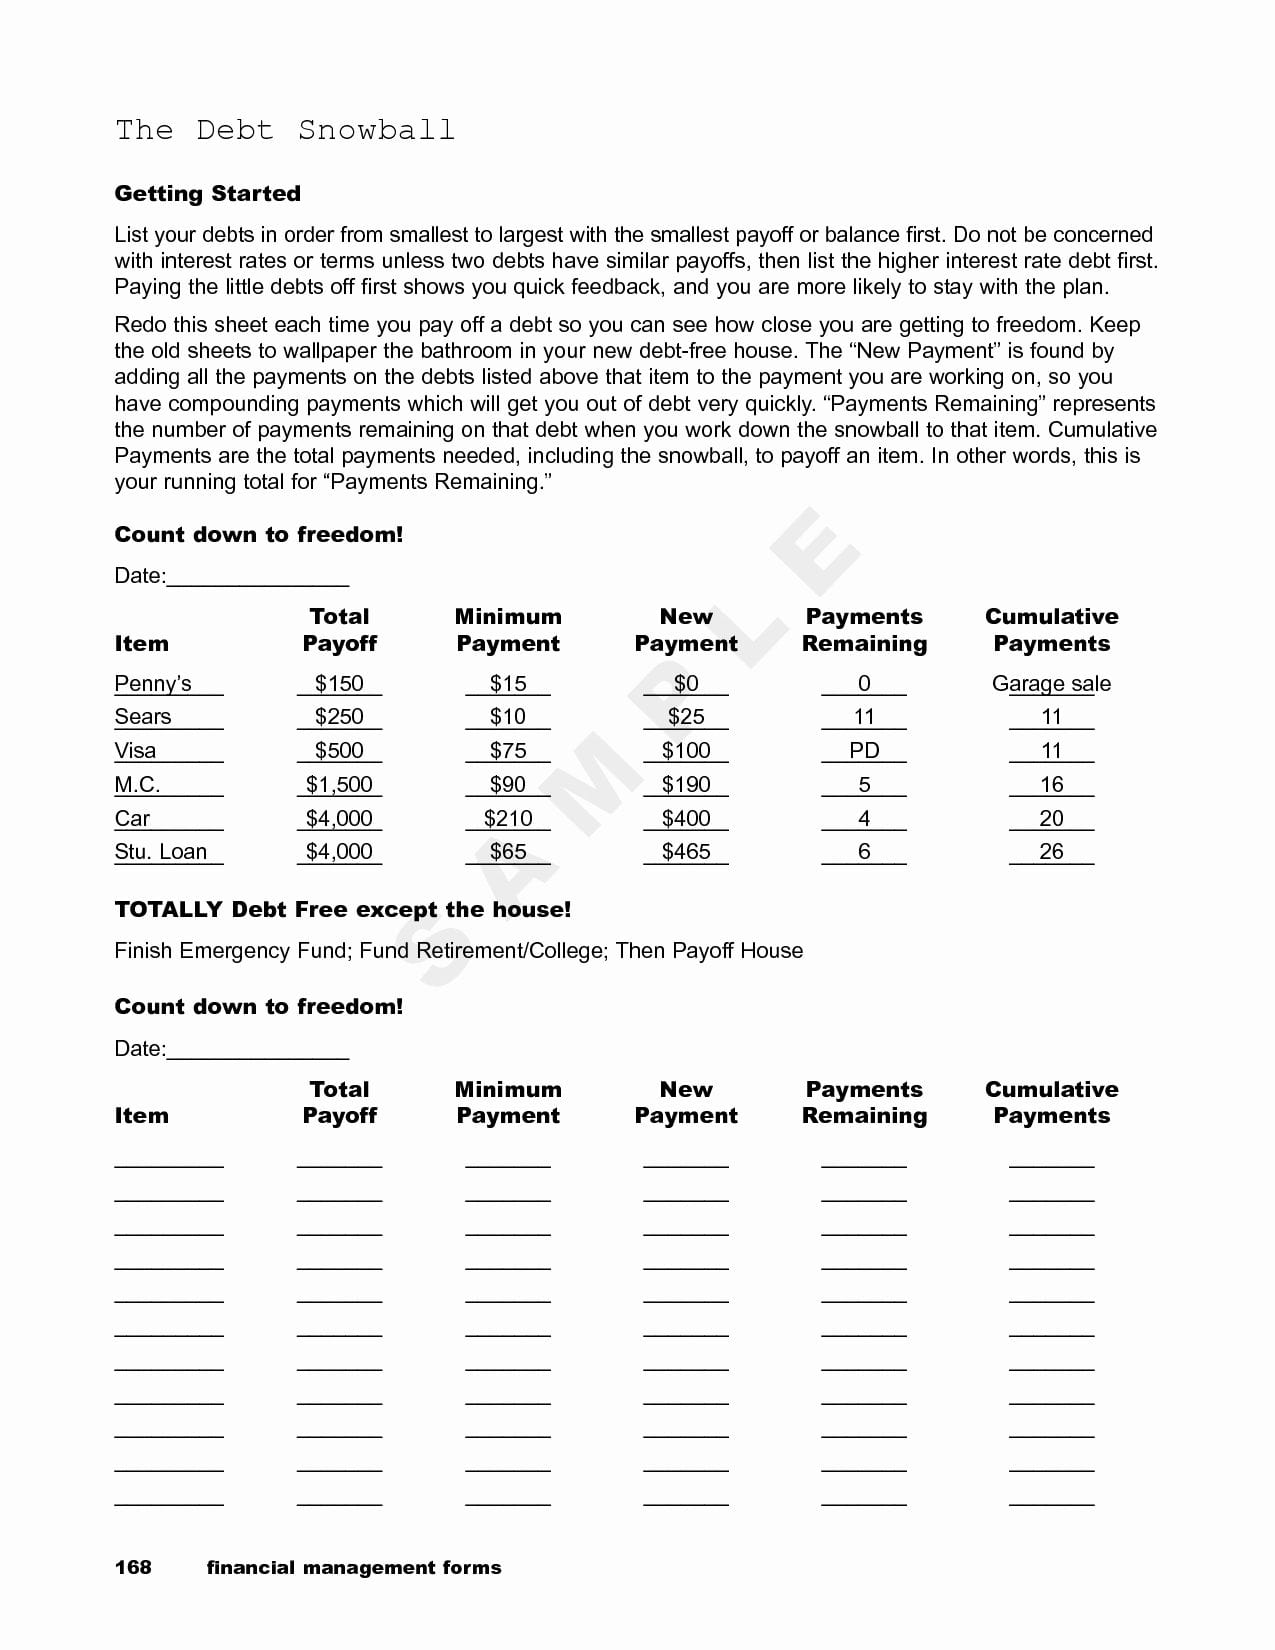 Dave Ramsey Spreadsheets Or Worksheet Dave Ramsey Debt Along With Dave Ramsey Debt Snowball Worksheets